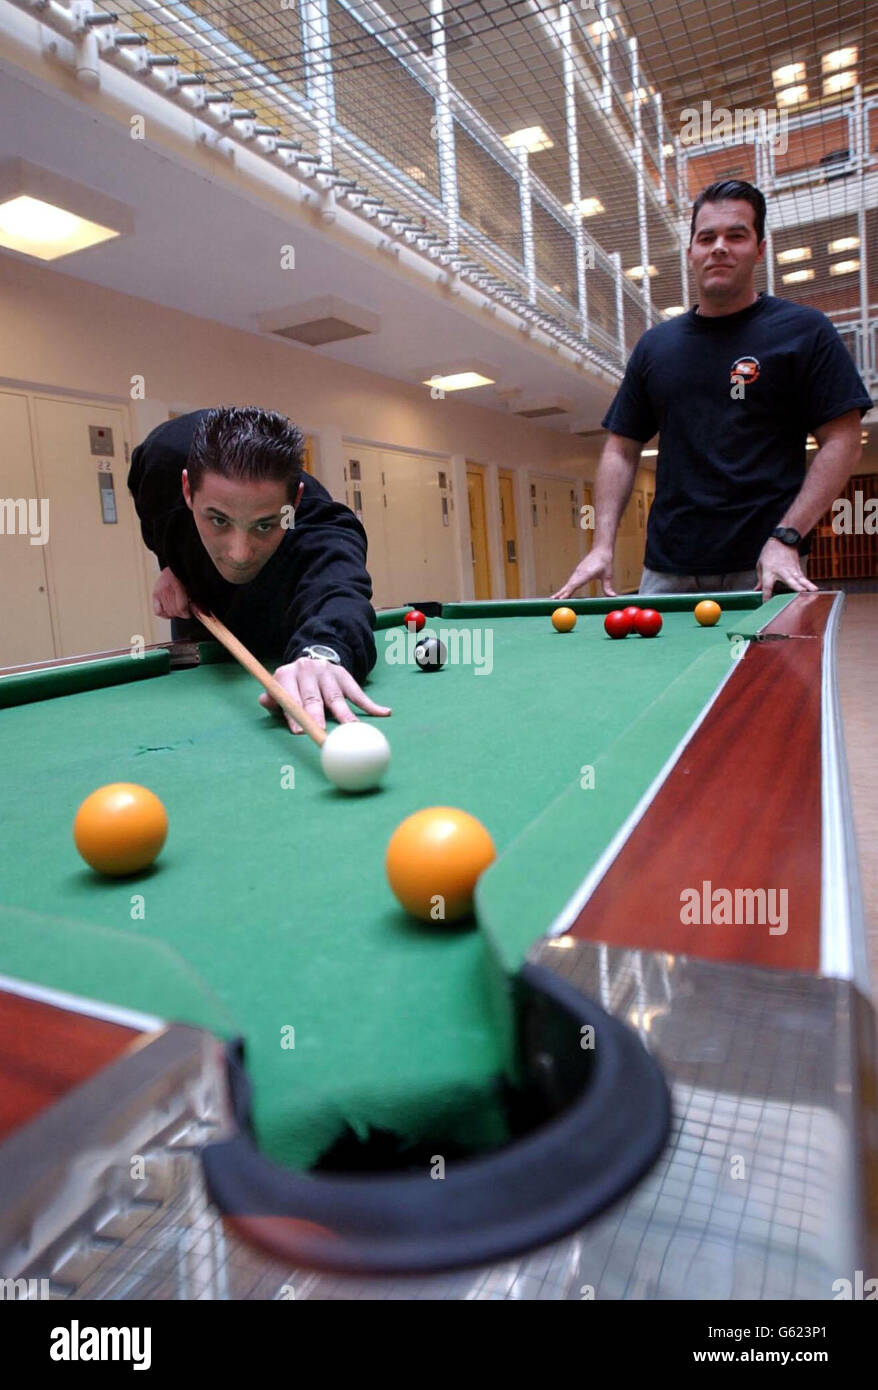 Prisoners play pool inside Wormwood Scrubs prison in west London, which is still riddled with serious problems four years after a culture of staff brutality was exposed, the Chief Inspector of Prisons said in a new report. * Although the 1,000-inmate jail is now rid of rogue officers who violently assaulted inmates, the institution is still 'stigmatised and struggling to move on' Anne Owers said. Stock Photo